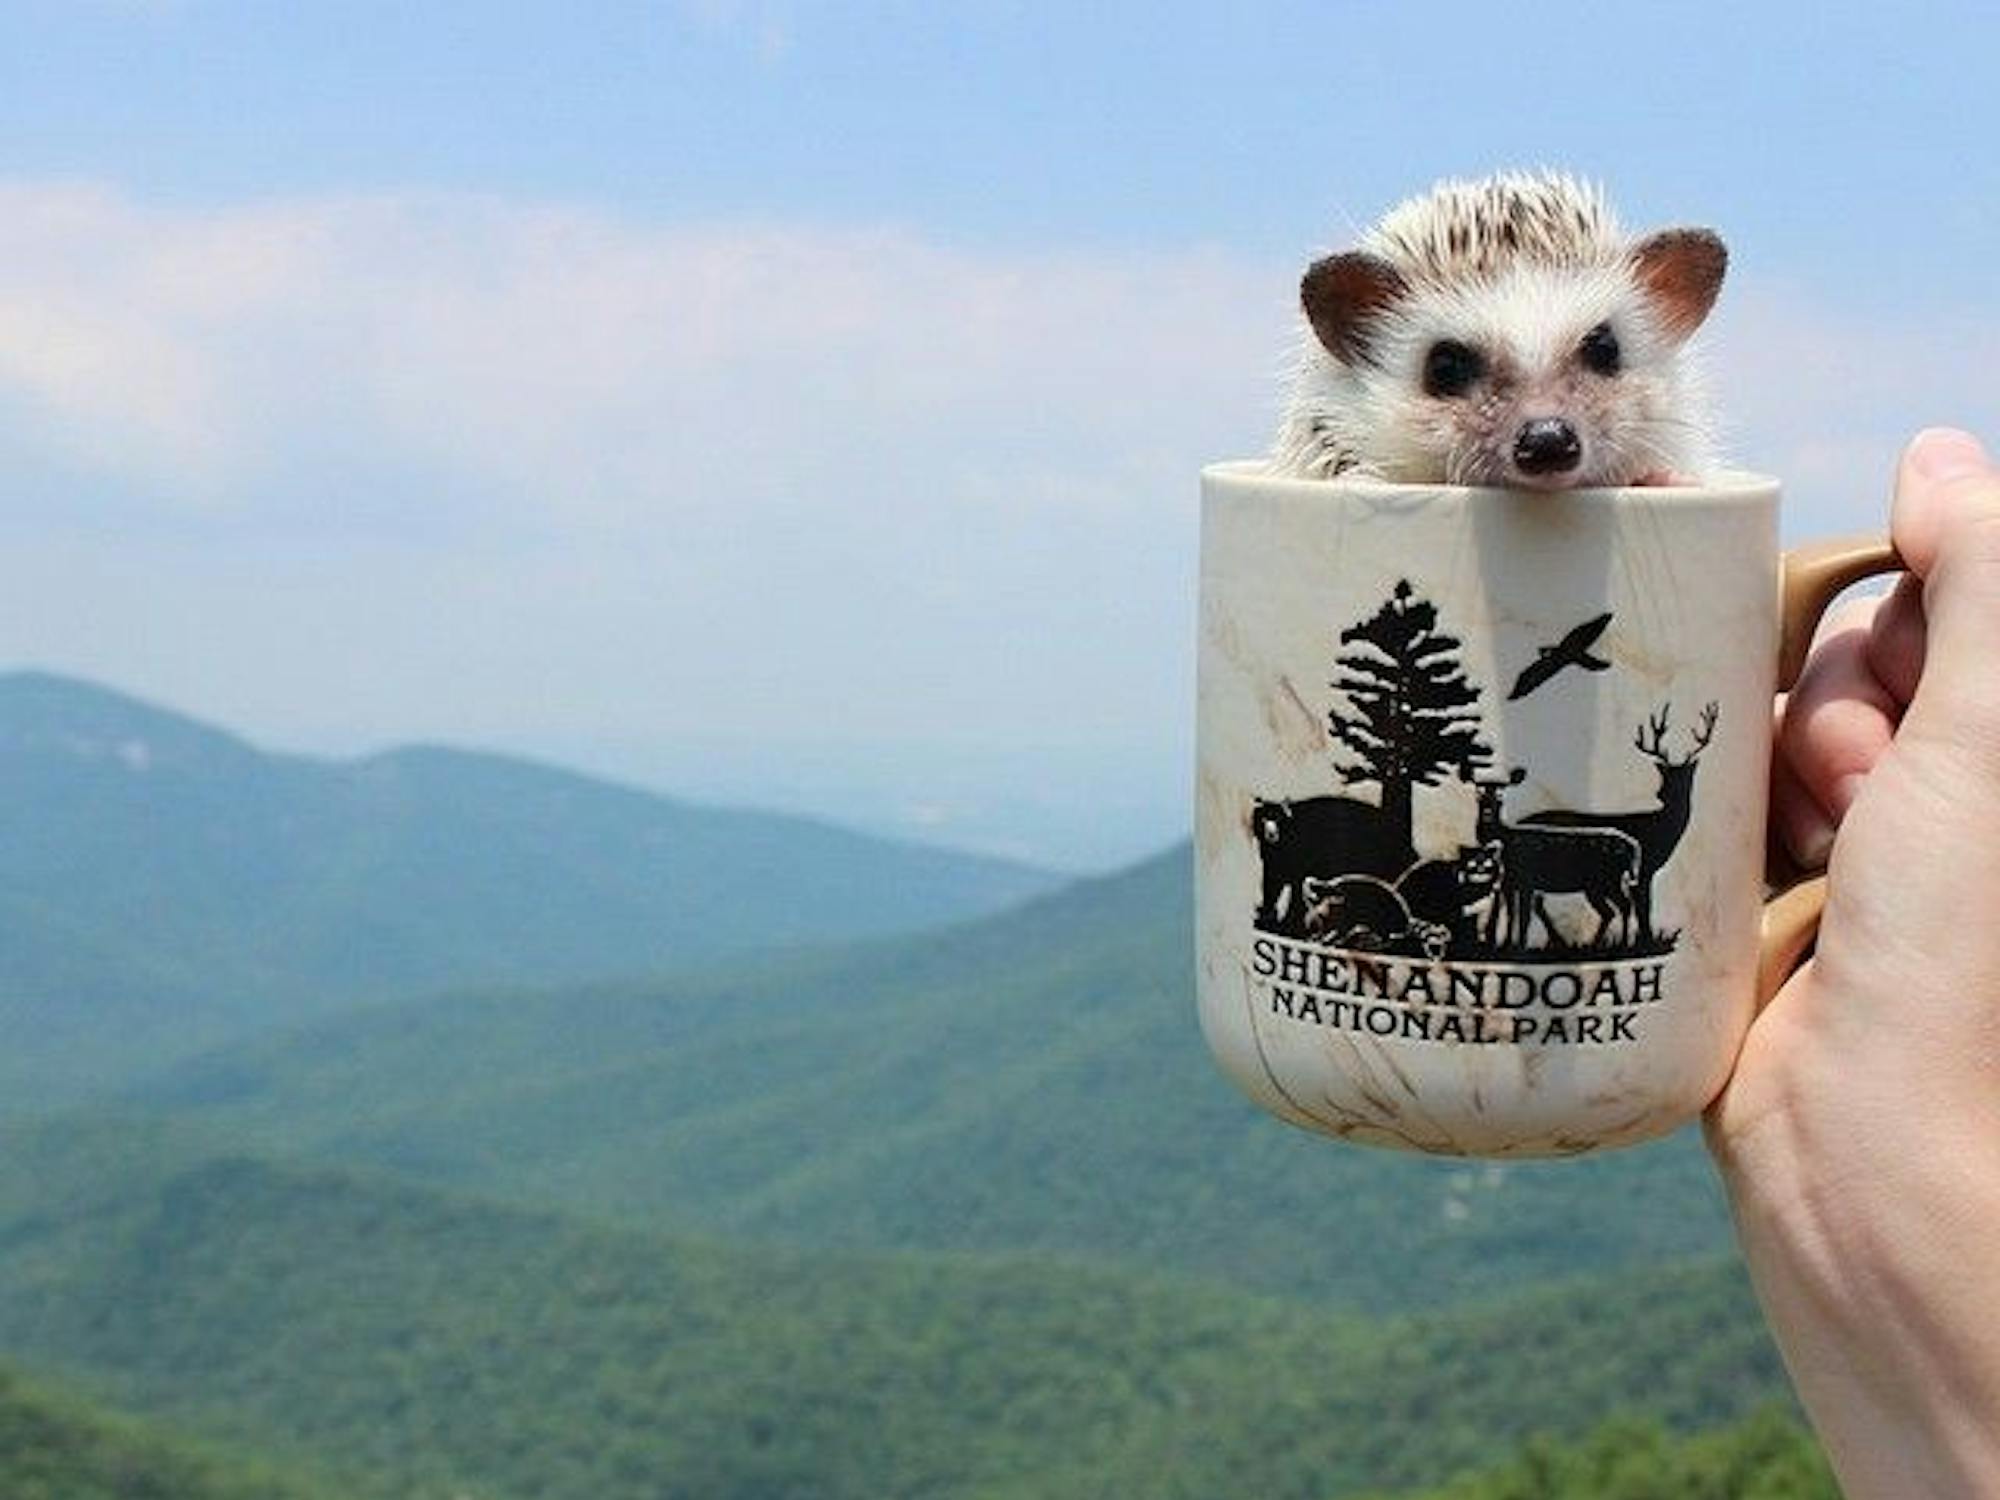 Calico the hedgehog has more than 86,000 followers on Instagram.